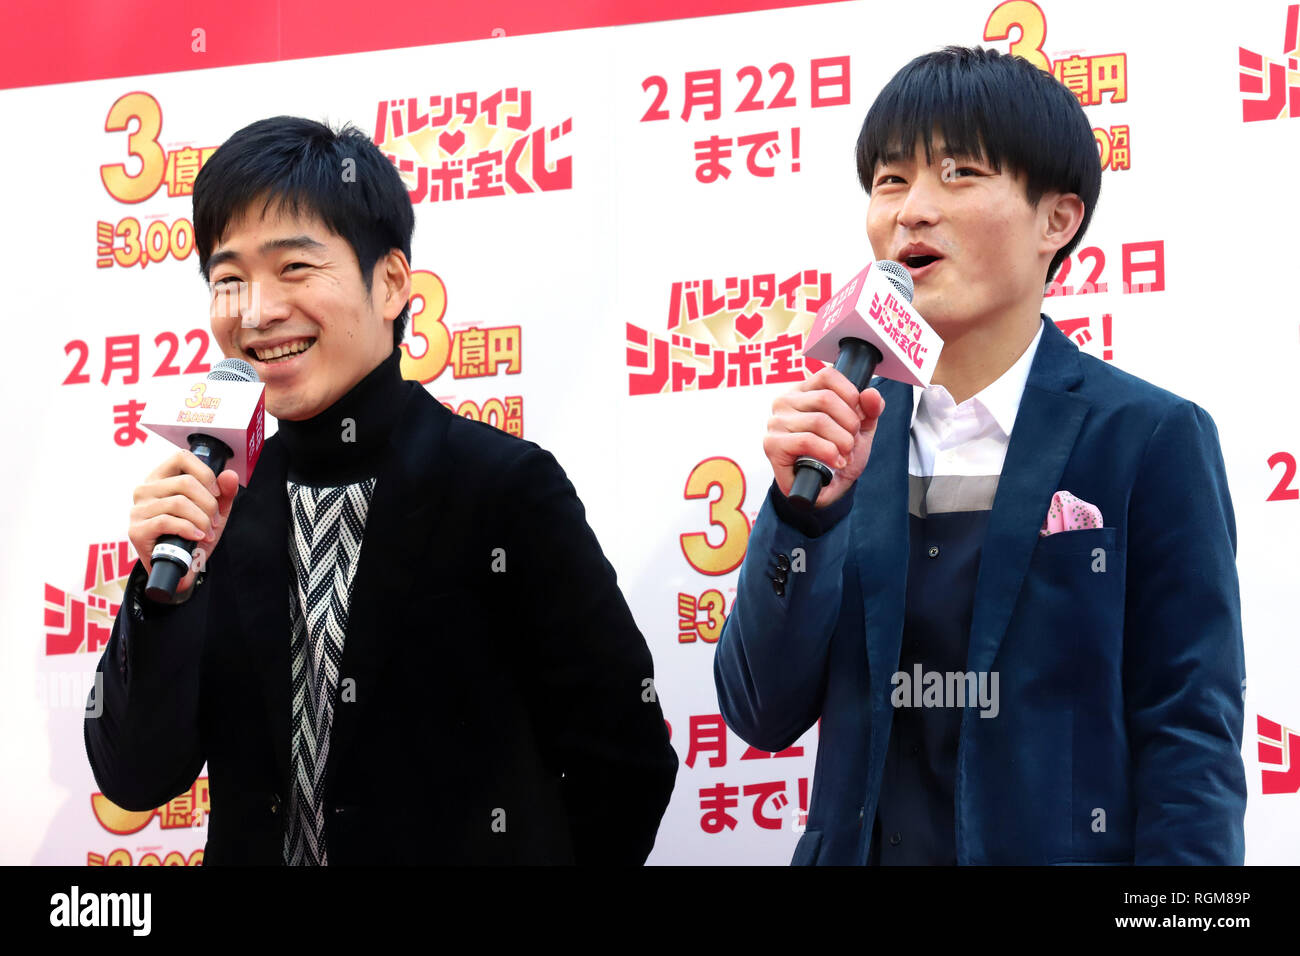 Tokyo Japan 30th Jan 19 Japanese Comedy Duo Jaru Jaru Members Jumpei Goto L And Shusuke Fukutoku R Attend A Promotional Event Of The Valentine Jumbo Lottery As The First Tickets Go